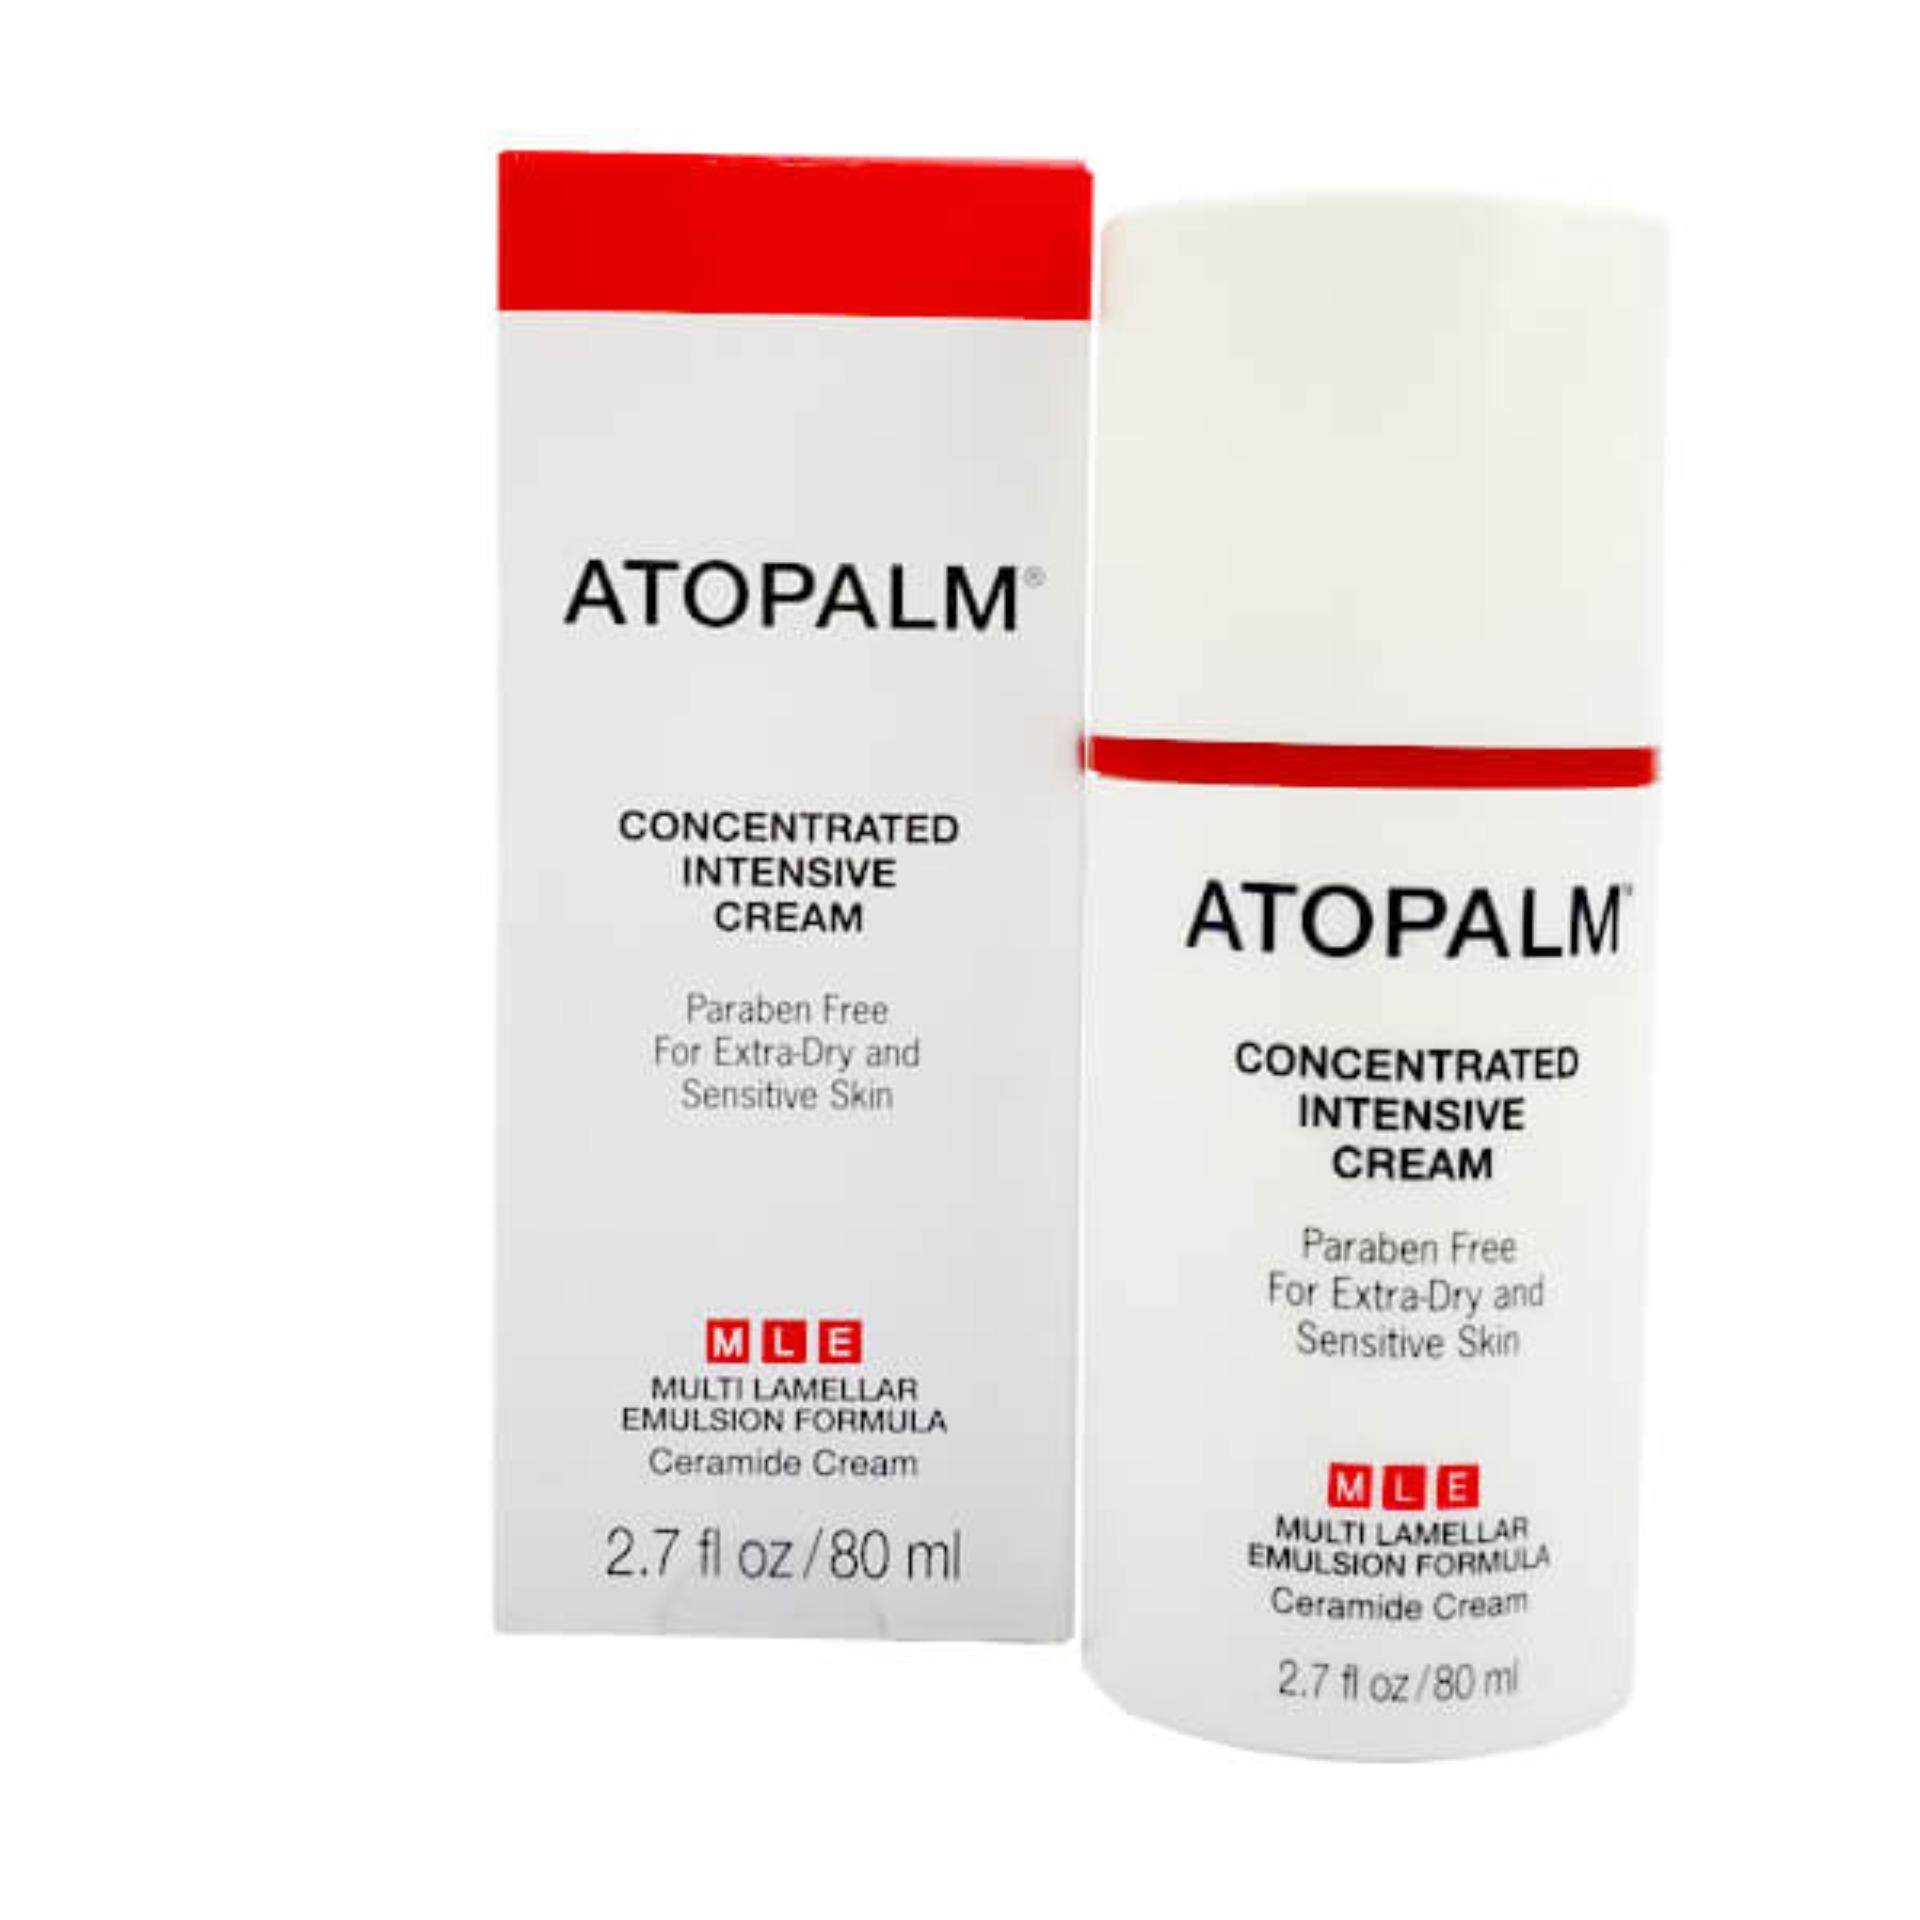 Atopalm Concentrated Intensive Cream 80 ml.